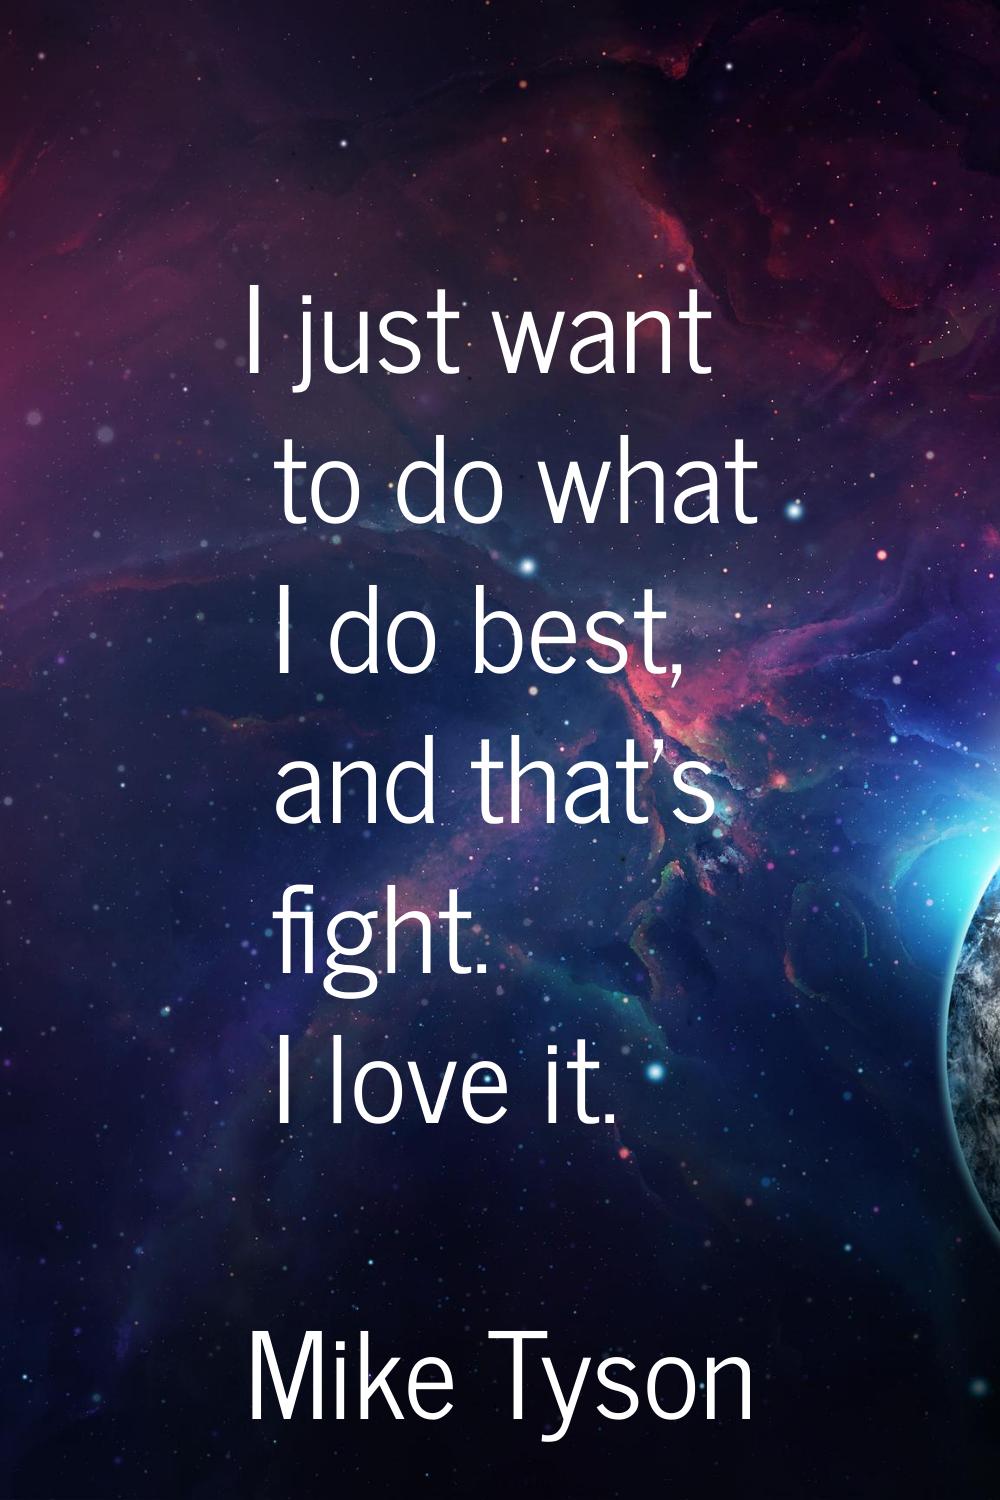 I just want to do what I do best, and that's fight. I love it.